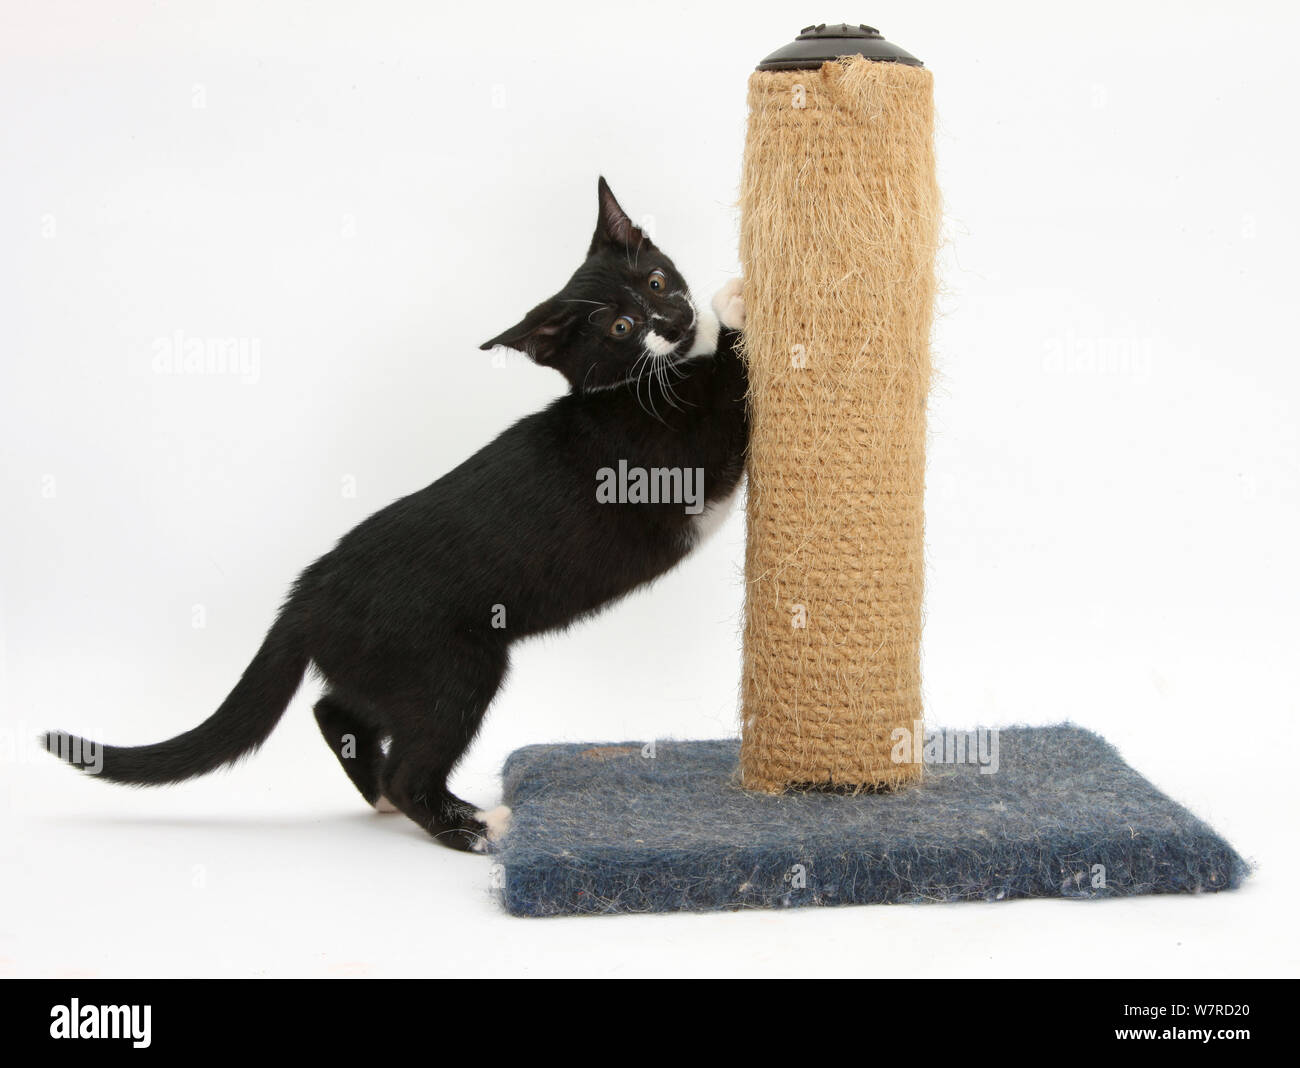 Black-and-white tuxedo male kitten, 'Tuxie' aged 3 months, using a scratching post. Stock Photo